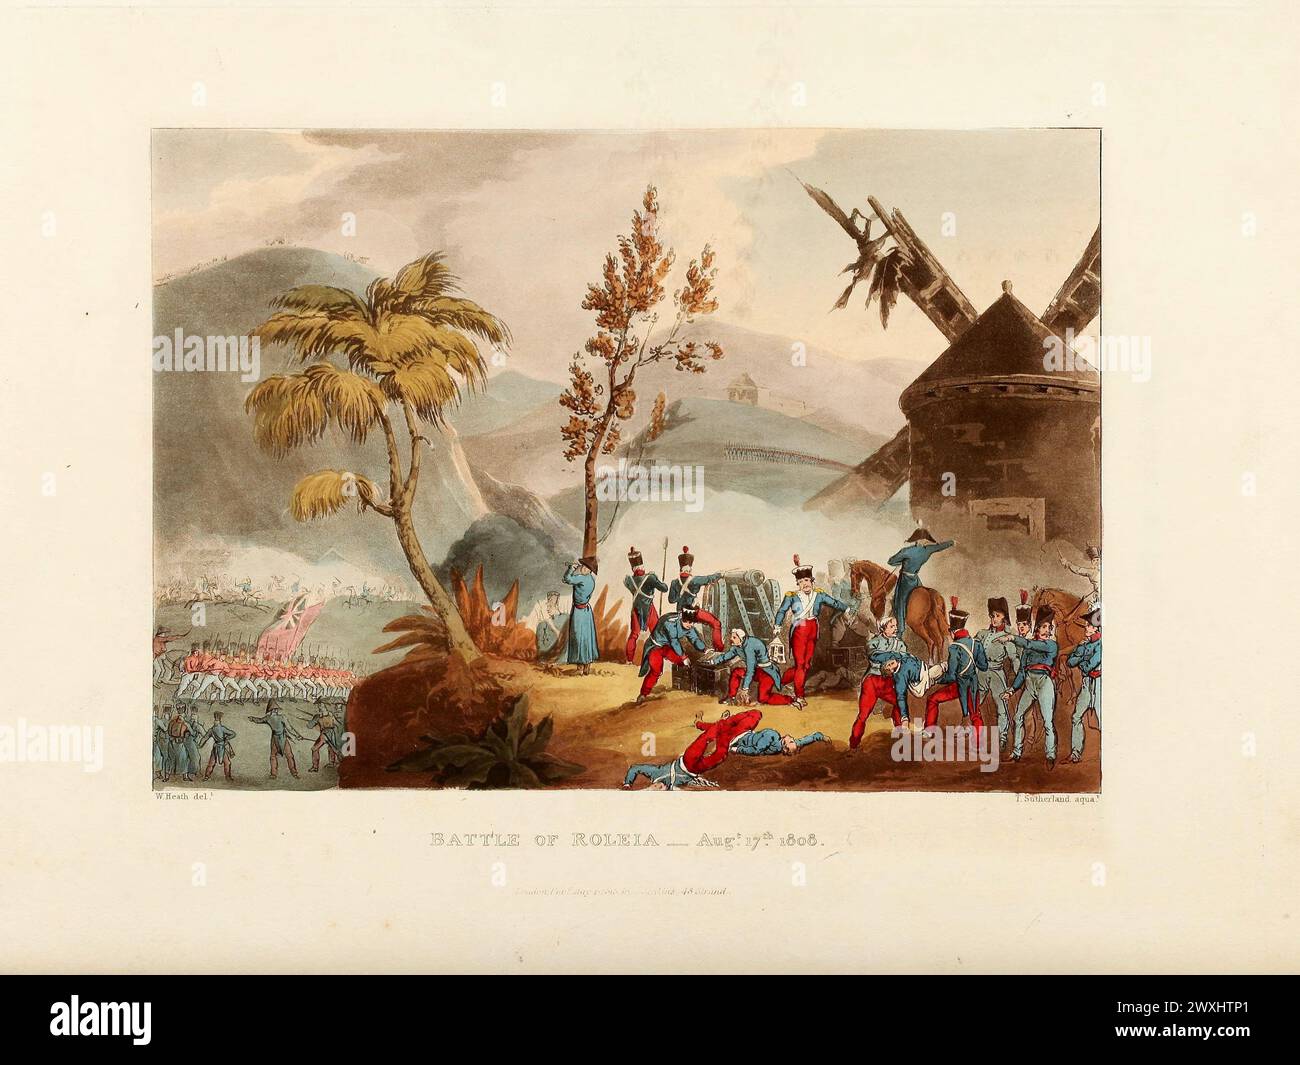 Battle of Roleia, August 17, 1808. Vintage Coloured Aquatint, published by James Jenkins, 1815,  from  The martial achievements of Great Britain and her allies : from 1799 to 1815. Stock Photo